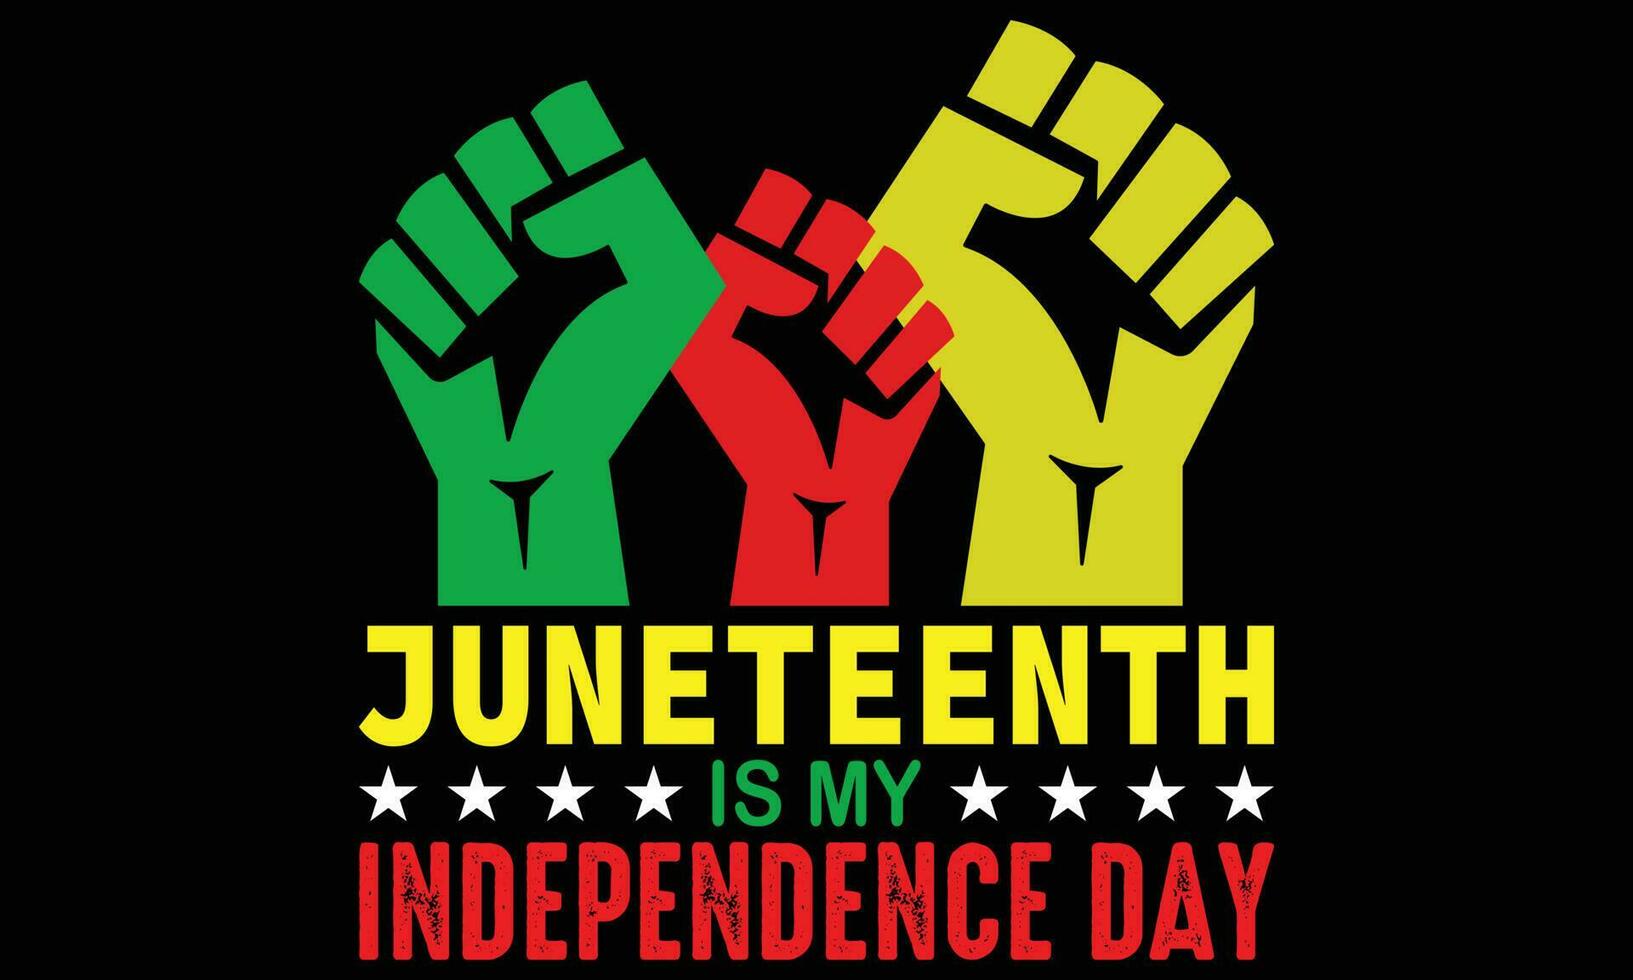 Juneteenth Is My Independence Day T-shirt Design Vector - Juneteenth African American Independence Day, June 19. Juneteenth Celebrate Black Freedom Good For T-Shirt, banner, greeting card design